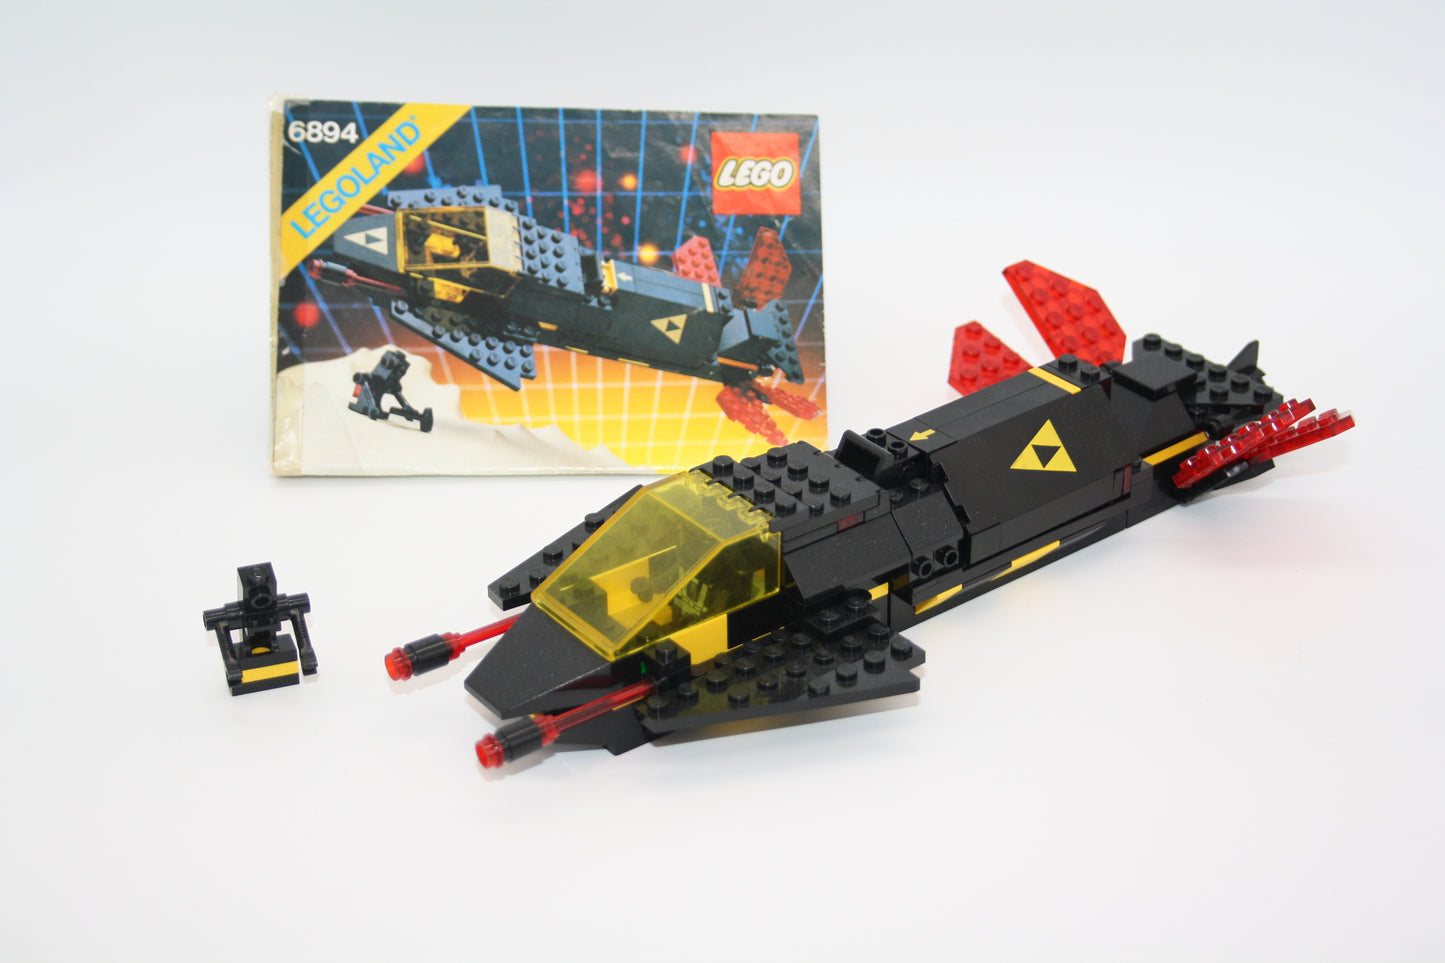 LEGO® Space - Set 6894 Blacktron I - Invader - Space/Weltraum - inkl. BA